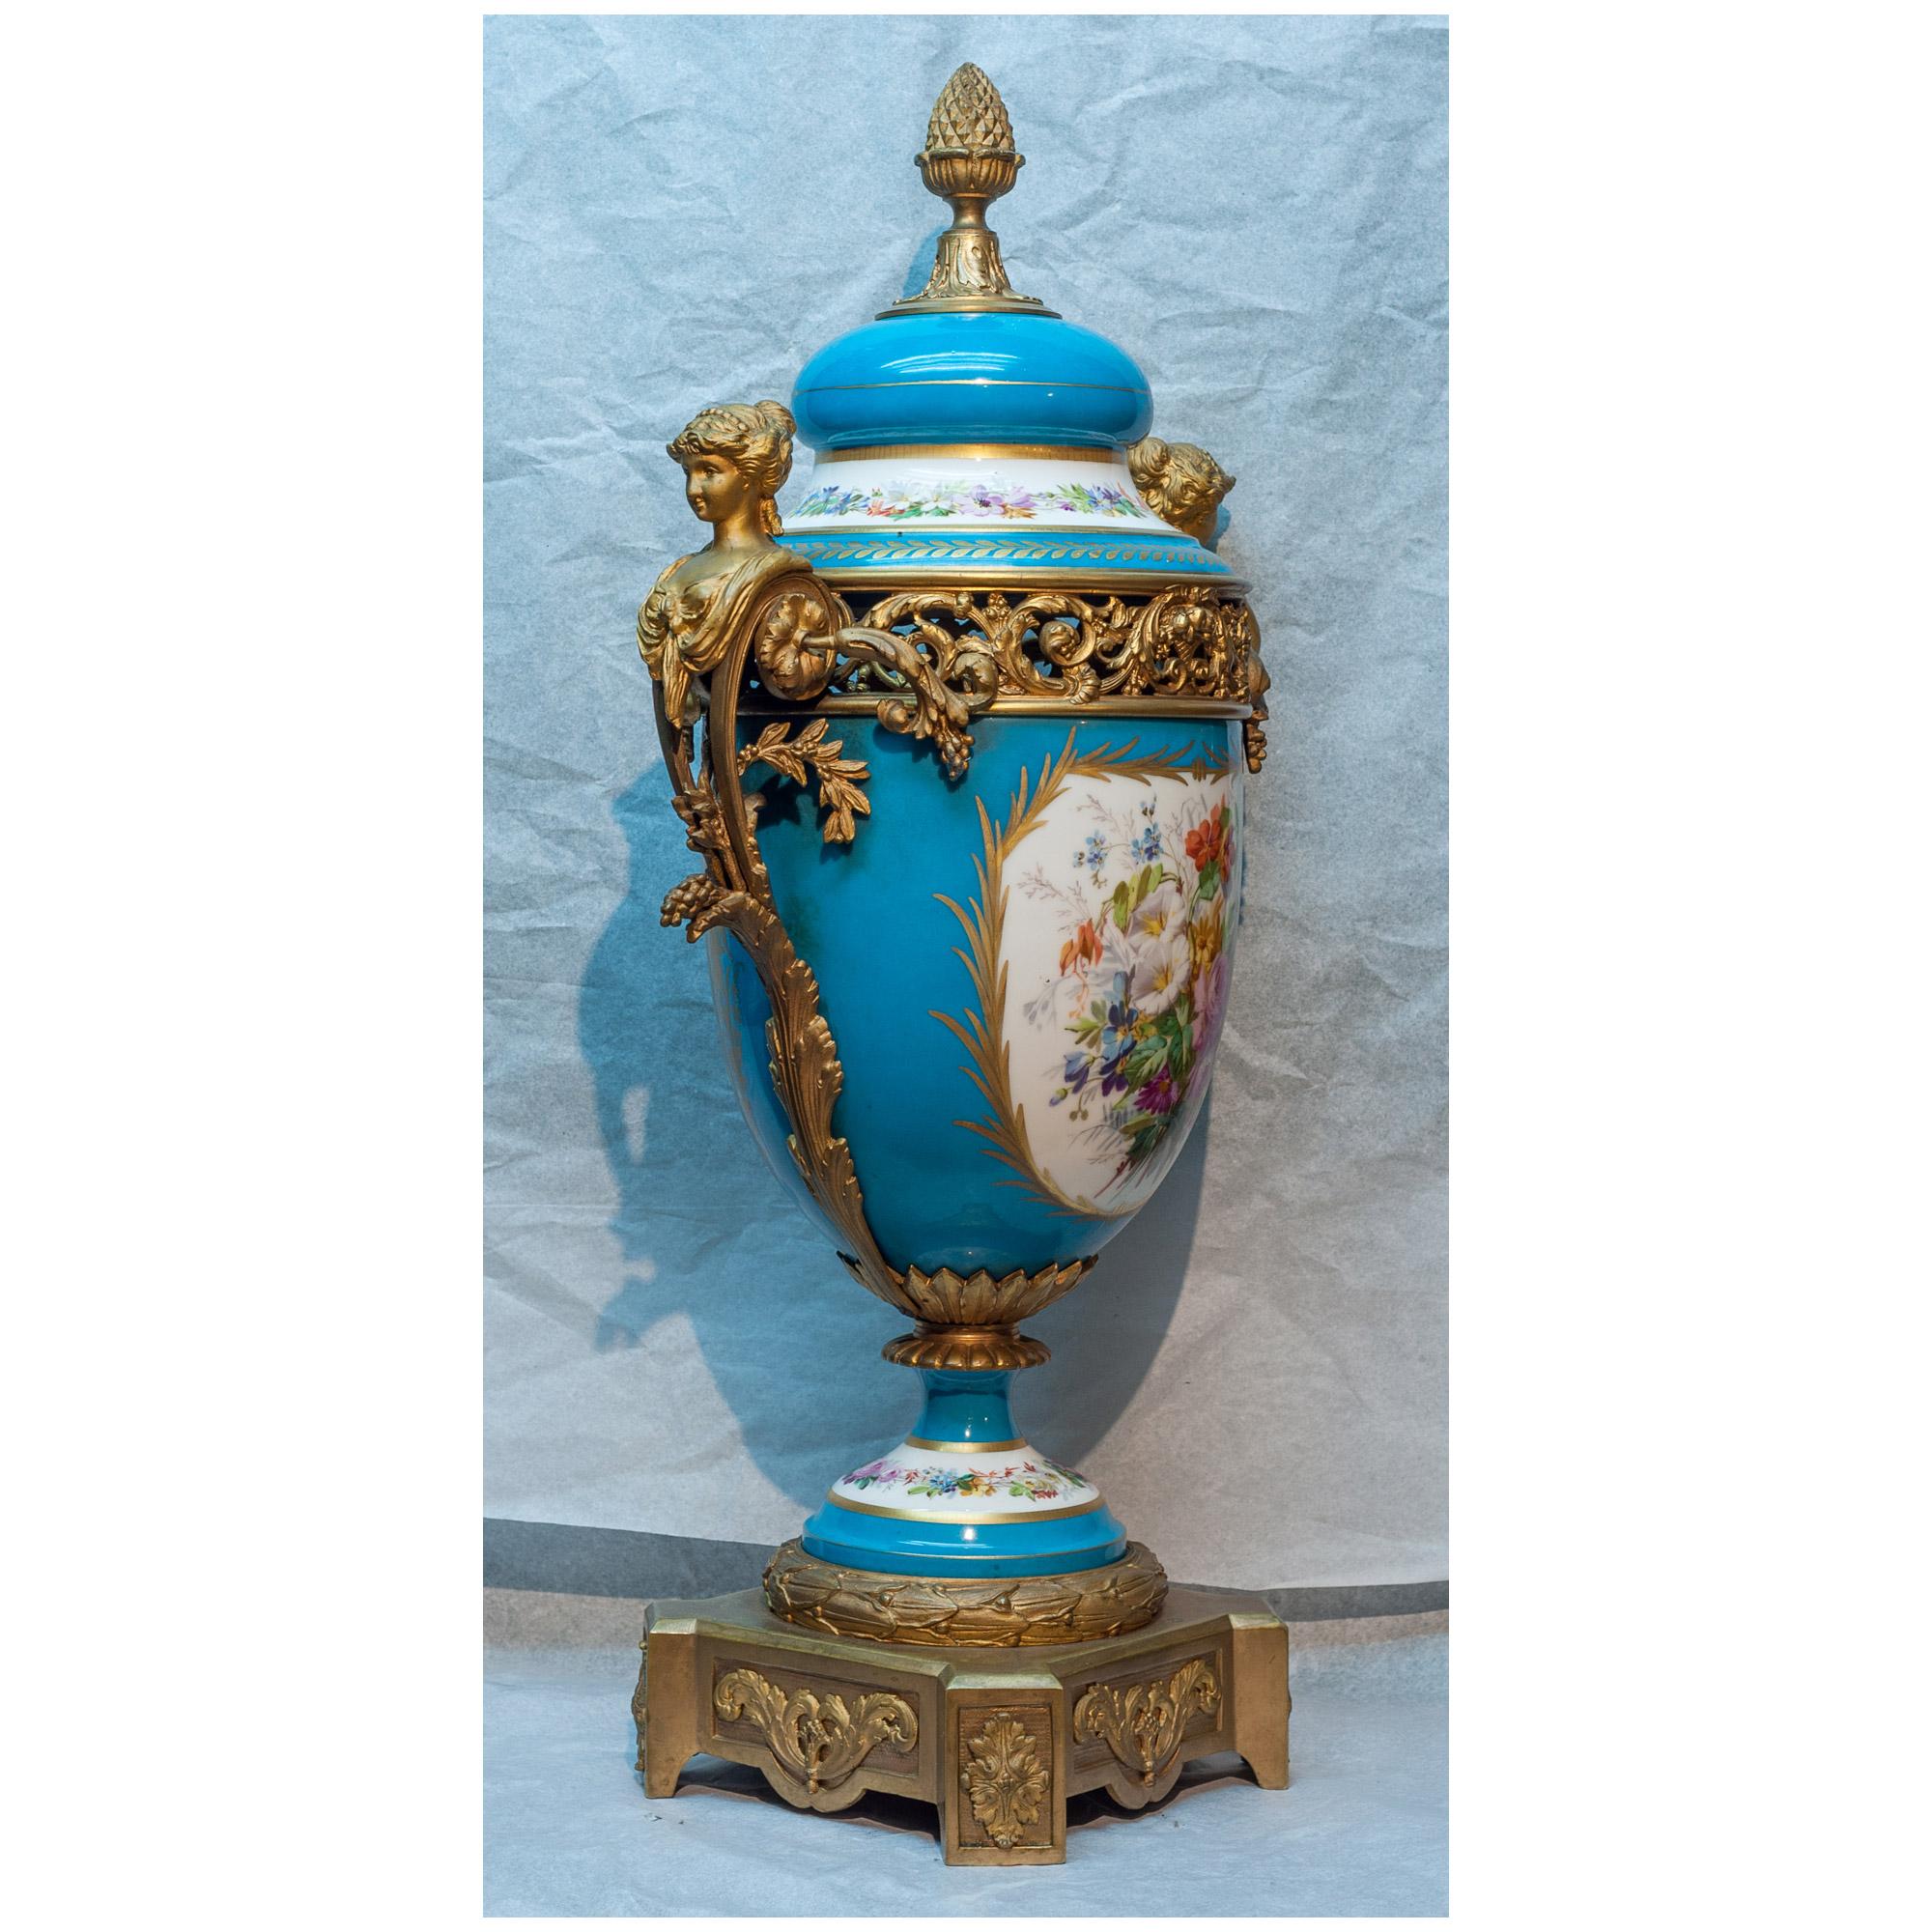 19th Century Pair of Sèvres Style Gilt Bronze Mounted Turquoise Porcelain Vases For Sale 1